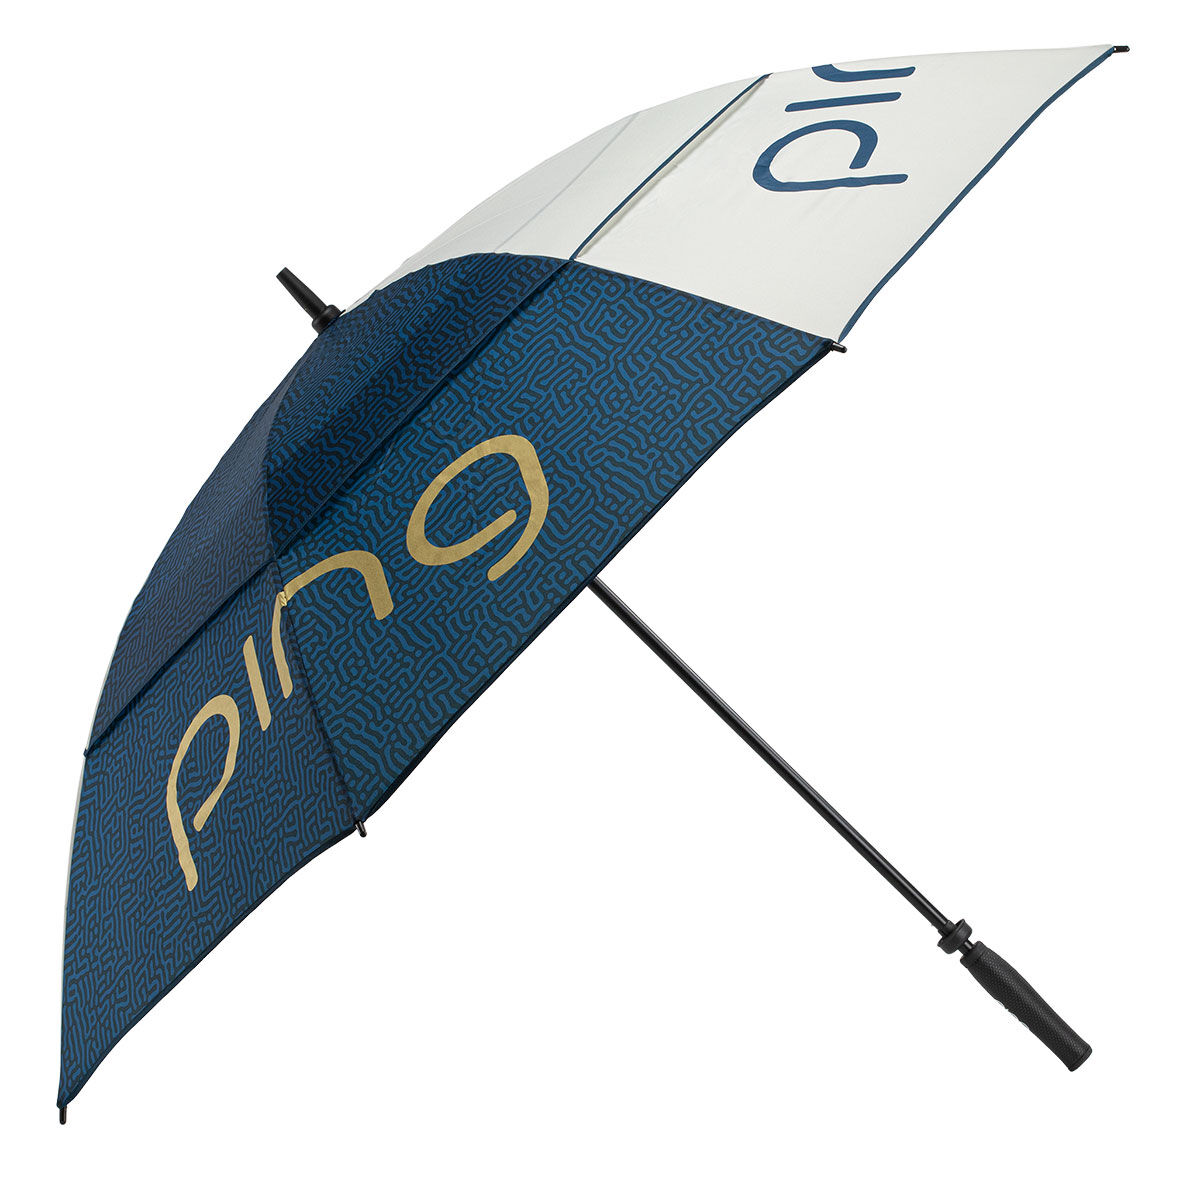 PING Womens Double Canopy Golf Umbrella, Female, Navy/gold, 62 inches | American Golf